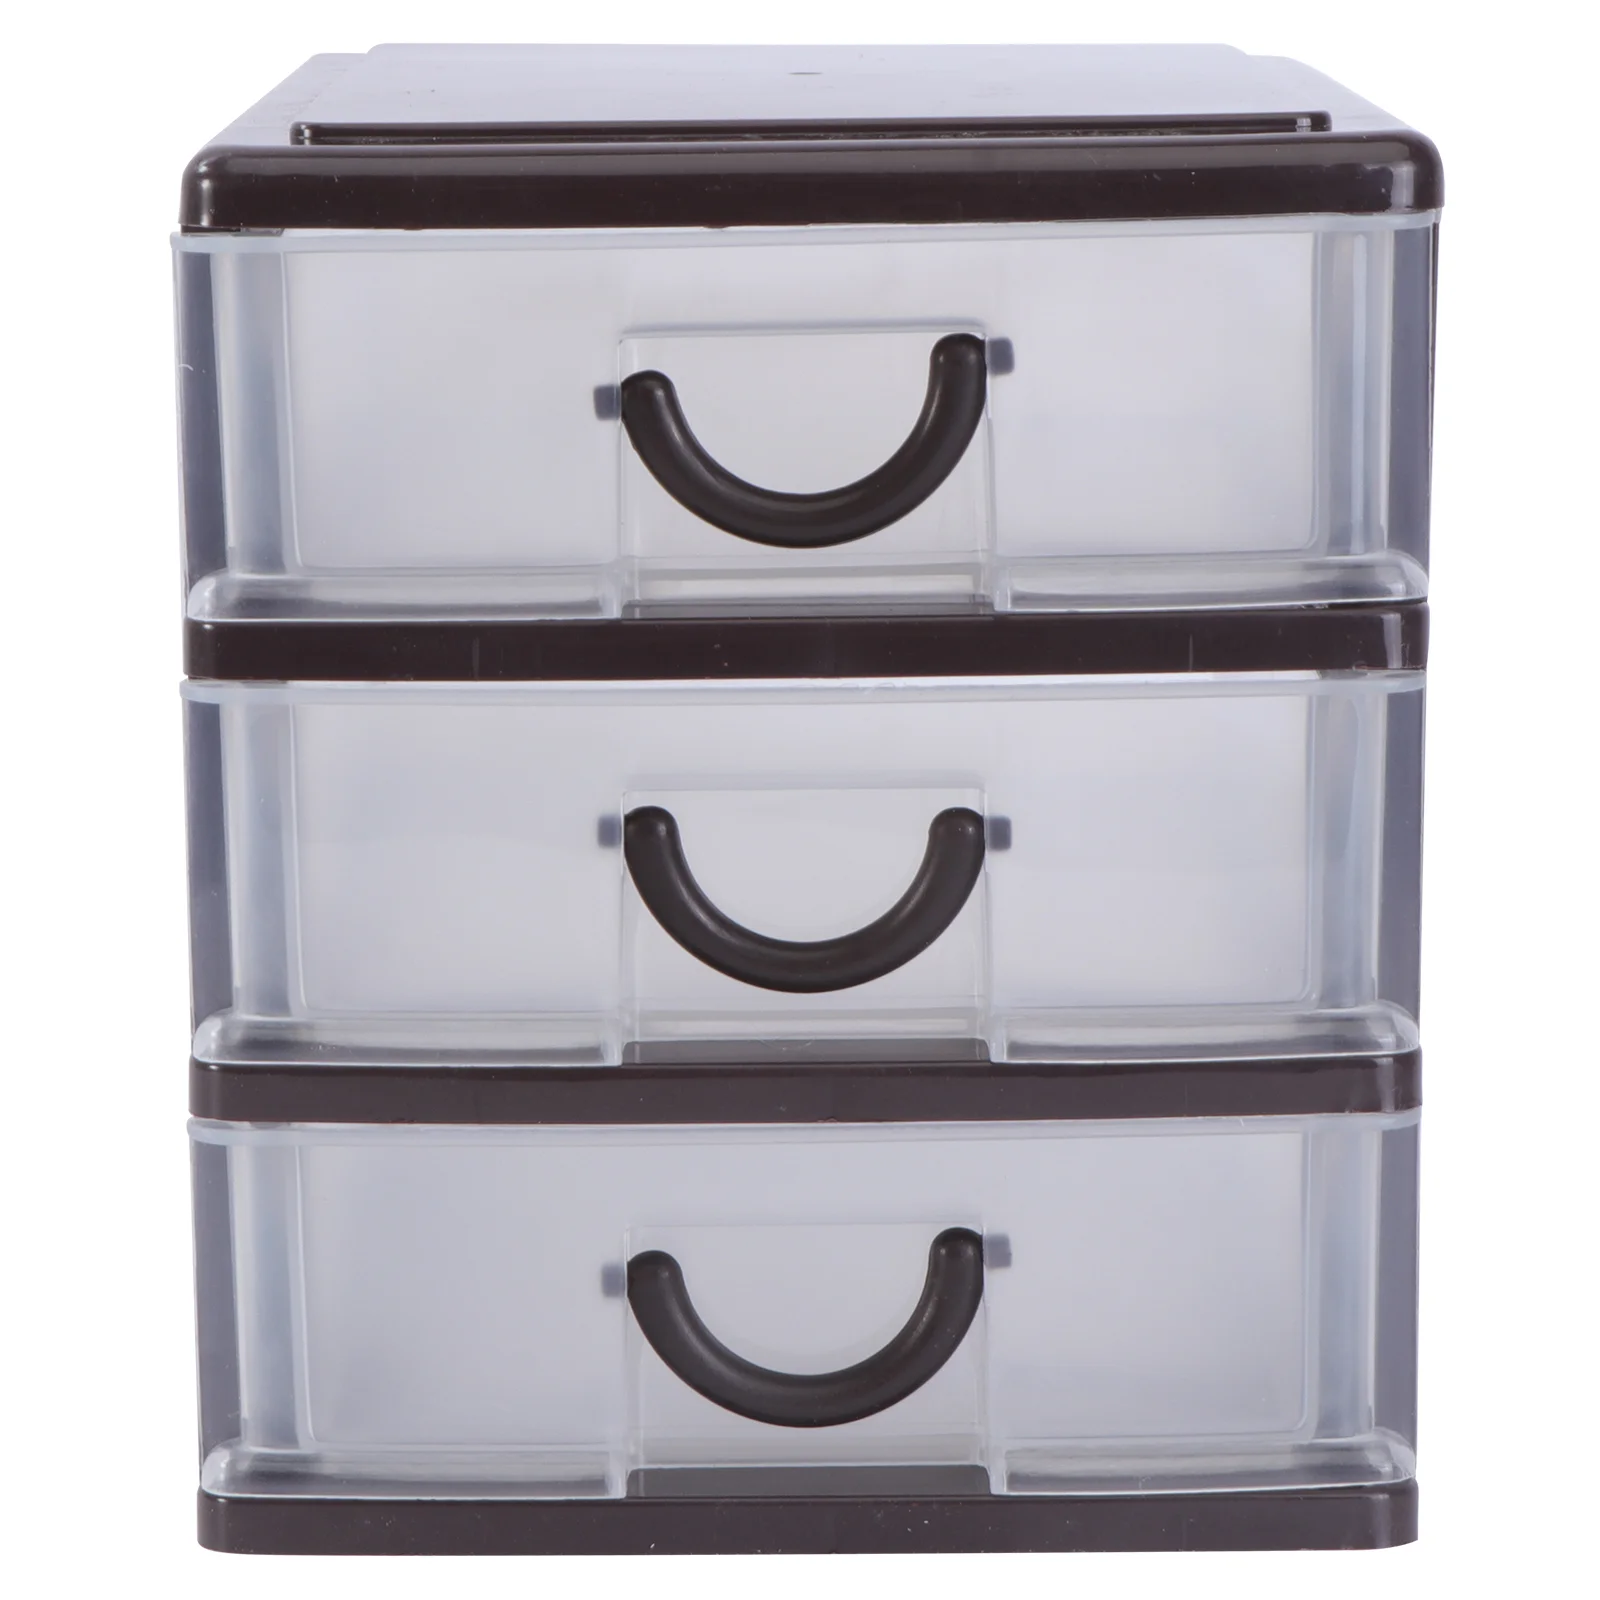 

Organizer Drawer Storage Drawers Box Desktop Desk Plastic Jewelry Bins Cabinet Office Sundries Units Table Mini Supply Container